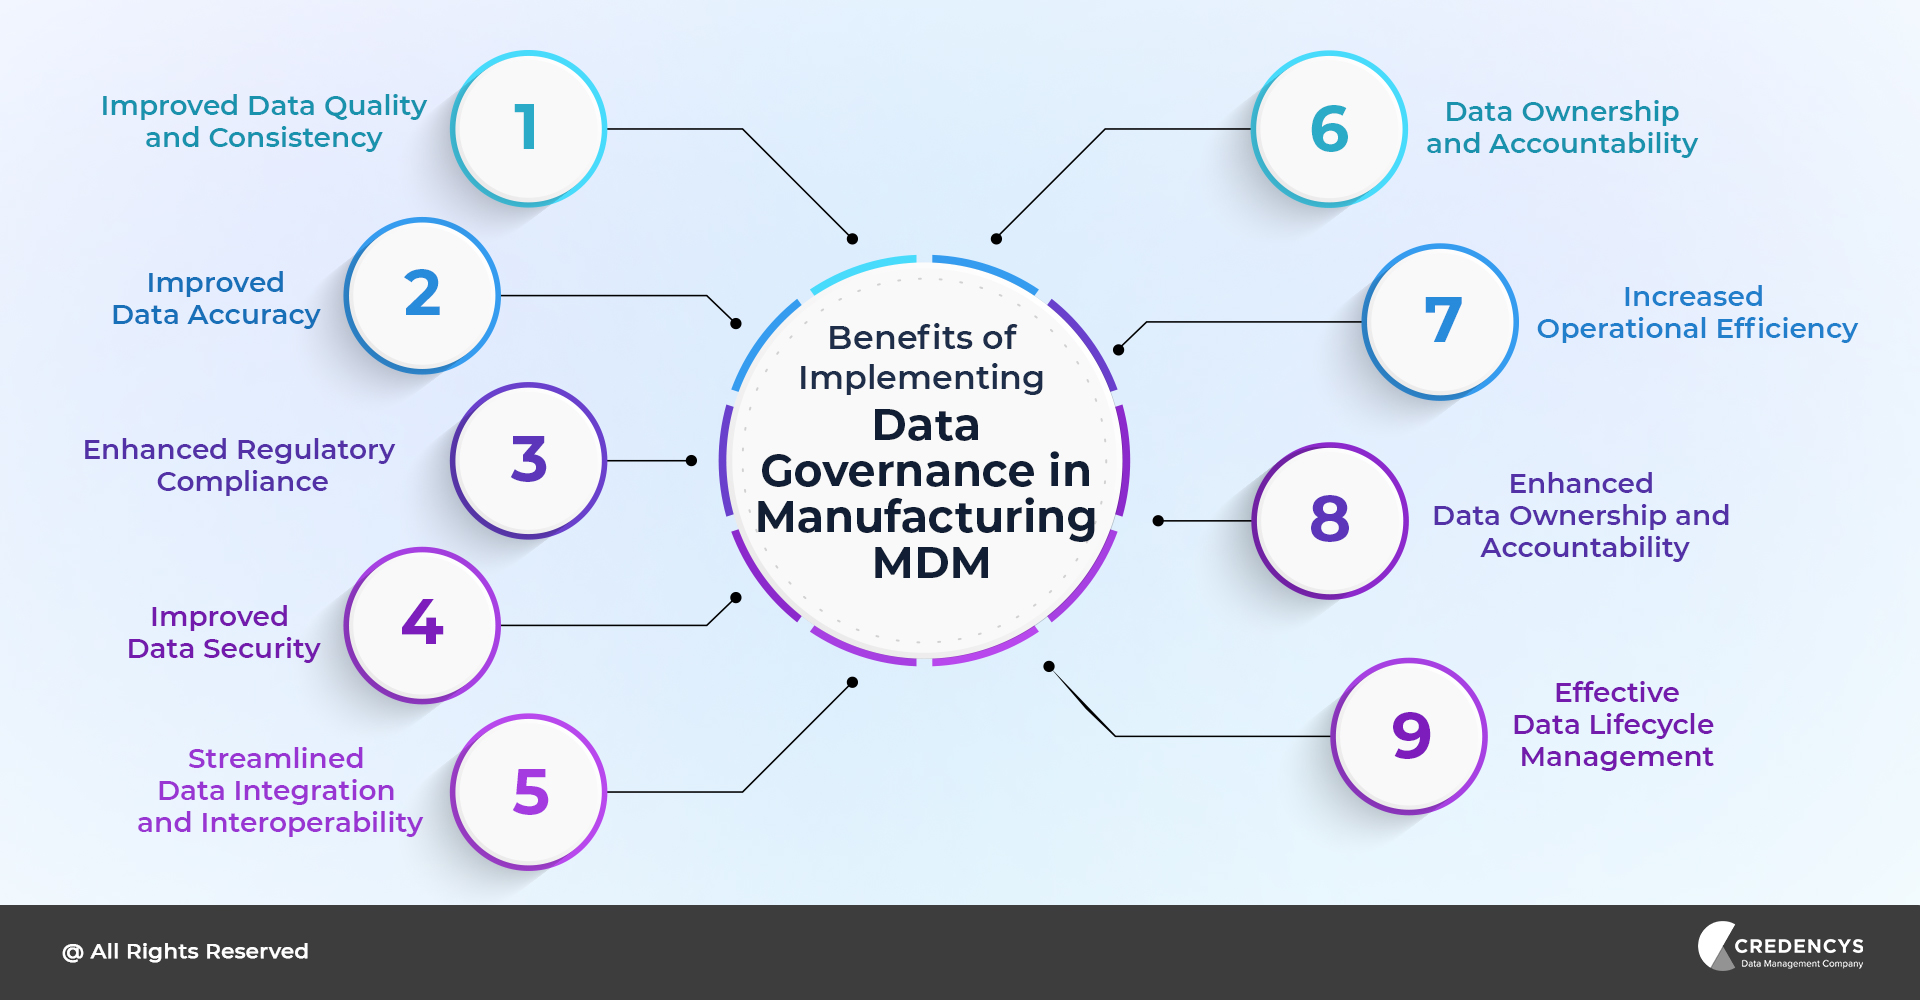 Benefits of Implementing Data Governance in Manufacturing MDM